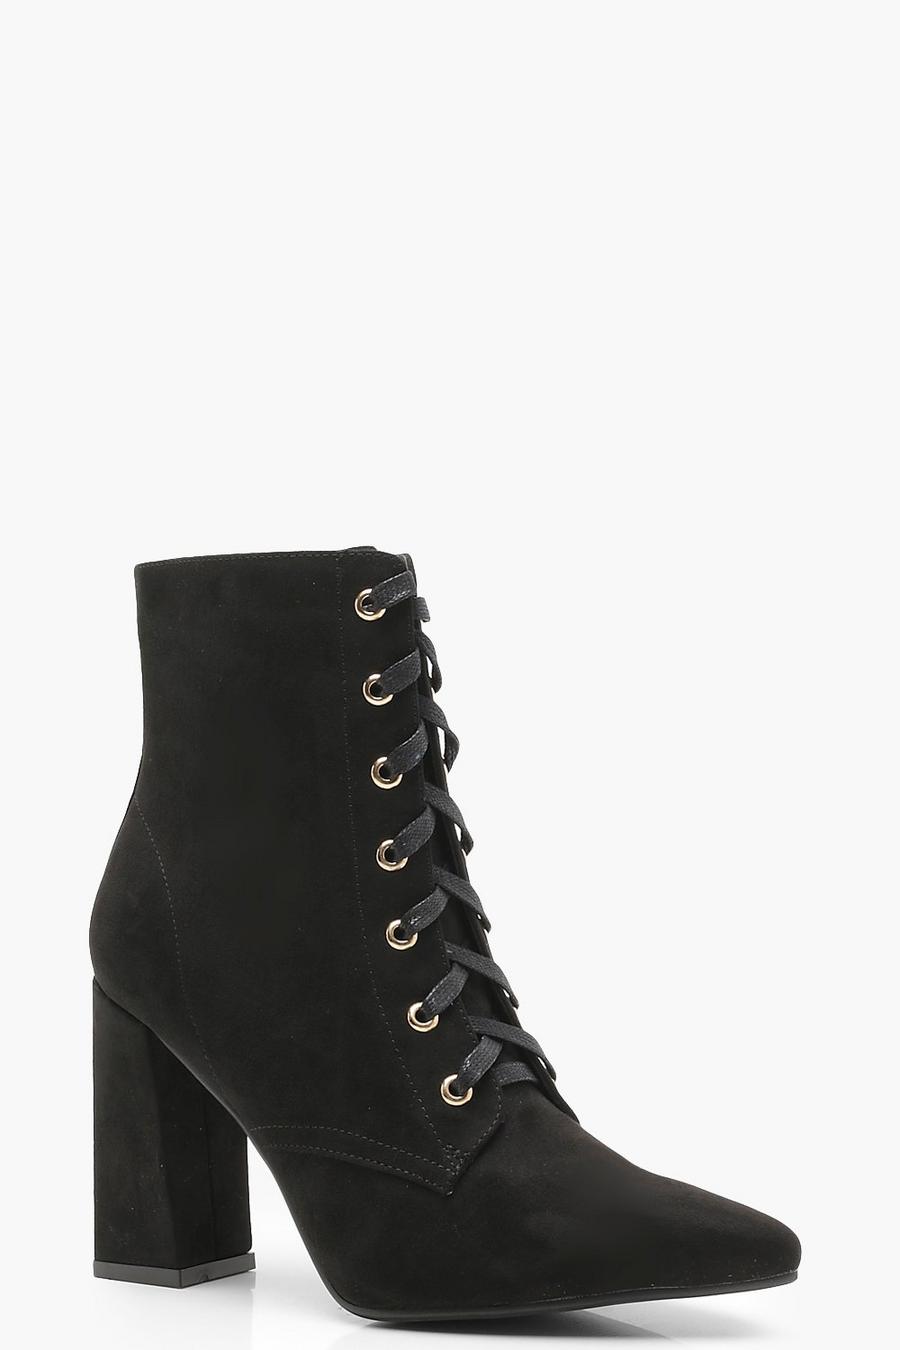 Lace Up Pointed Toe Ankle Shoe Boots | boohoo